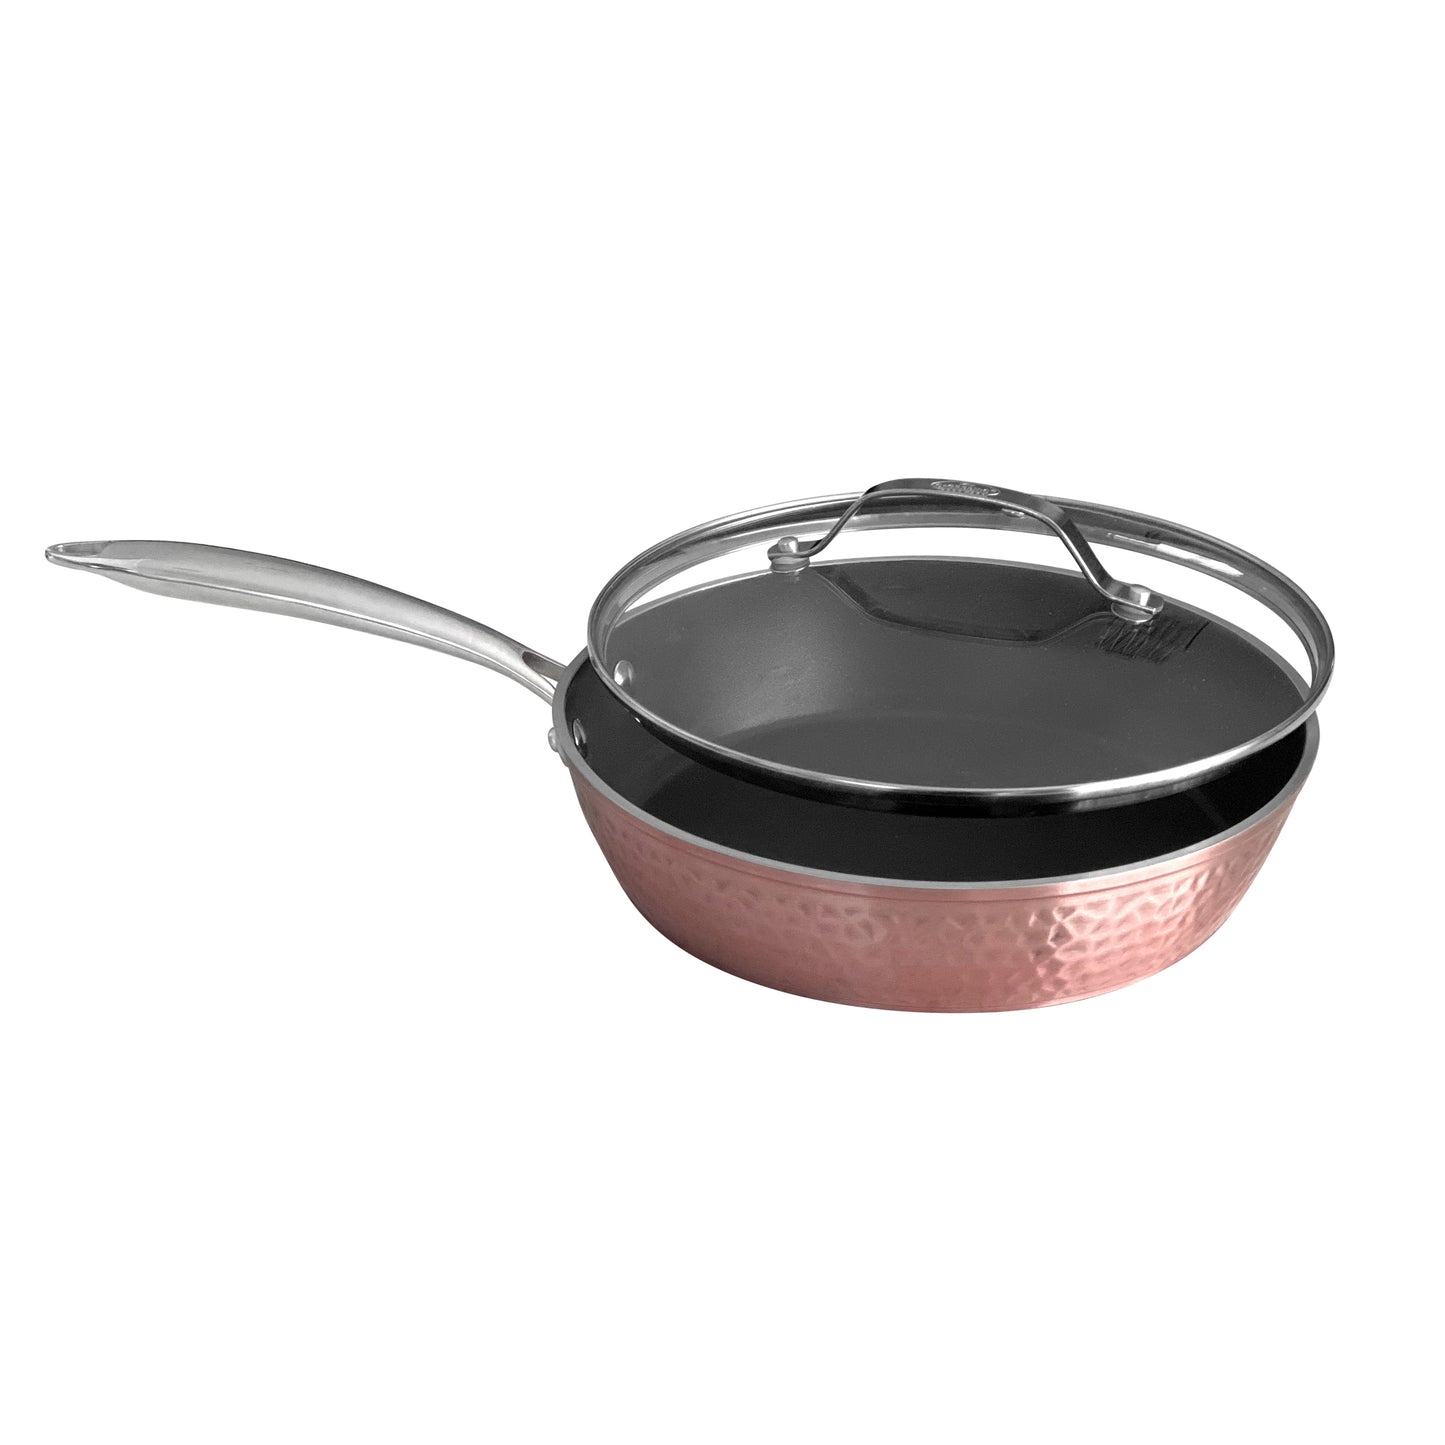 Hammered Rose Gold 10" Pan with Glass Lid